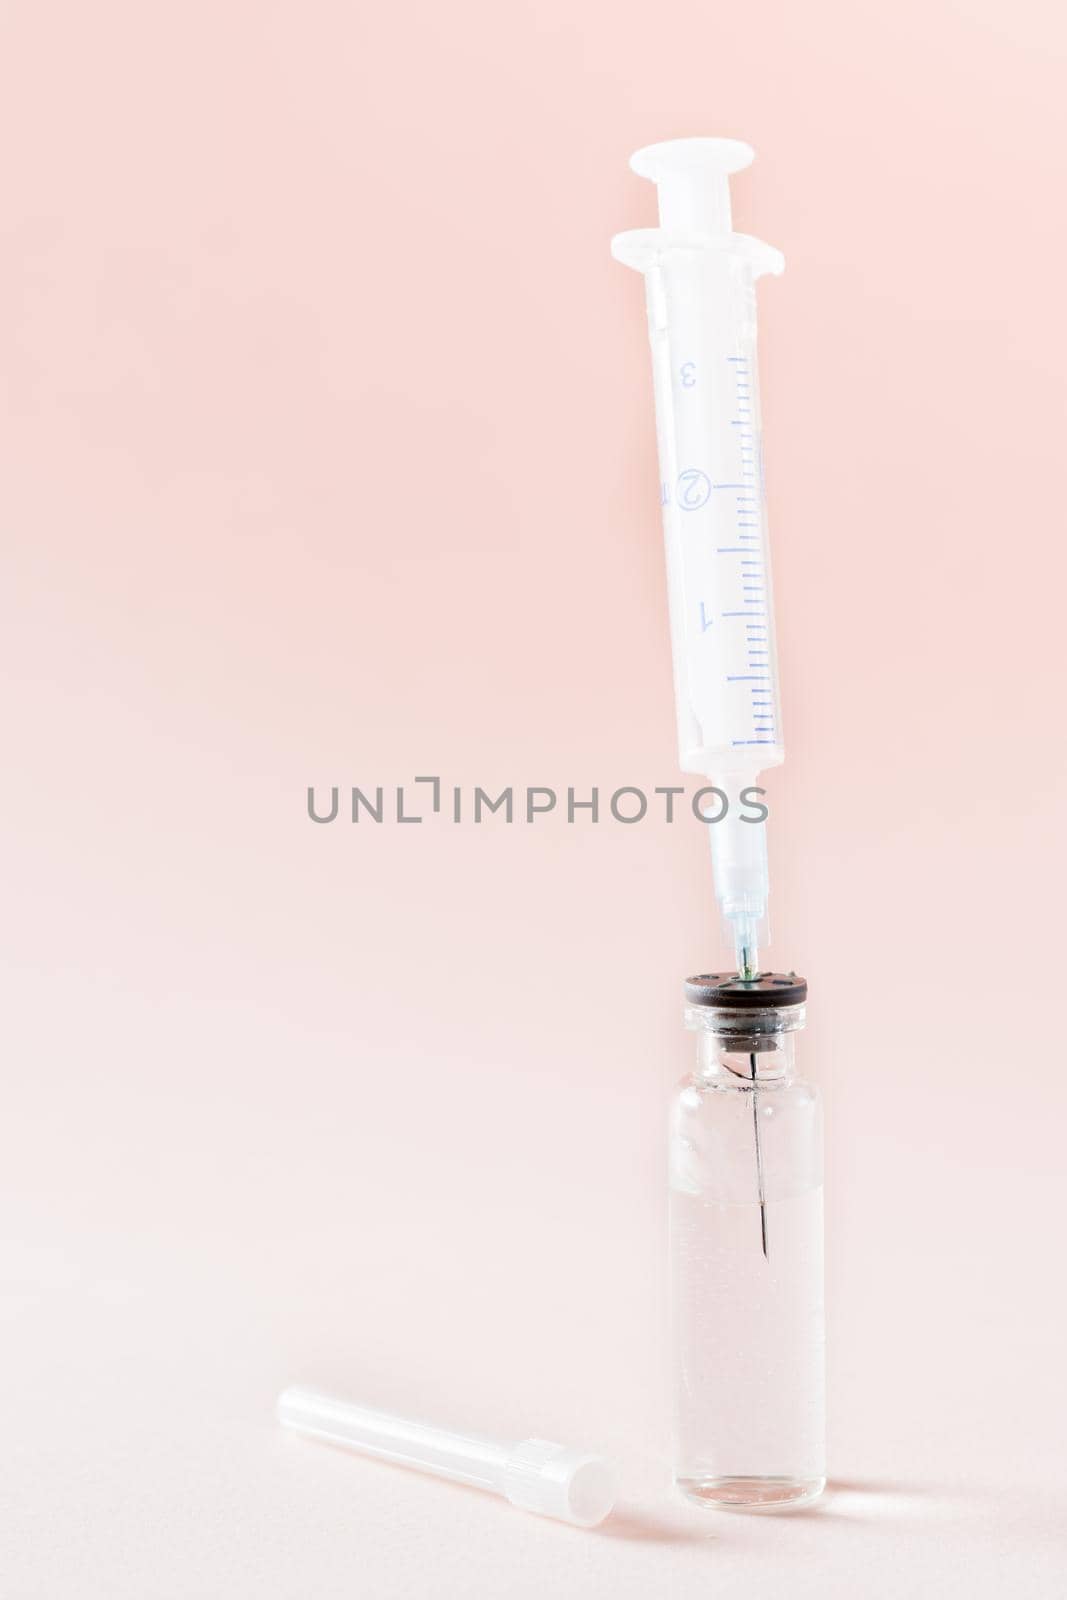 Vaccination and Immunization. Syringe needle inserted into a glass vial with vaccine. Vertical view